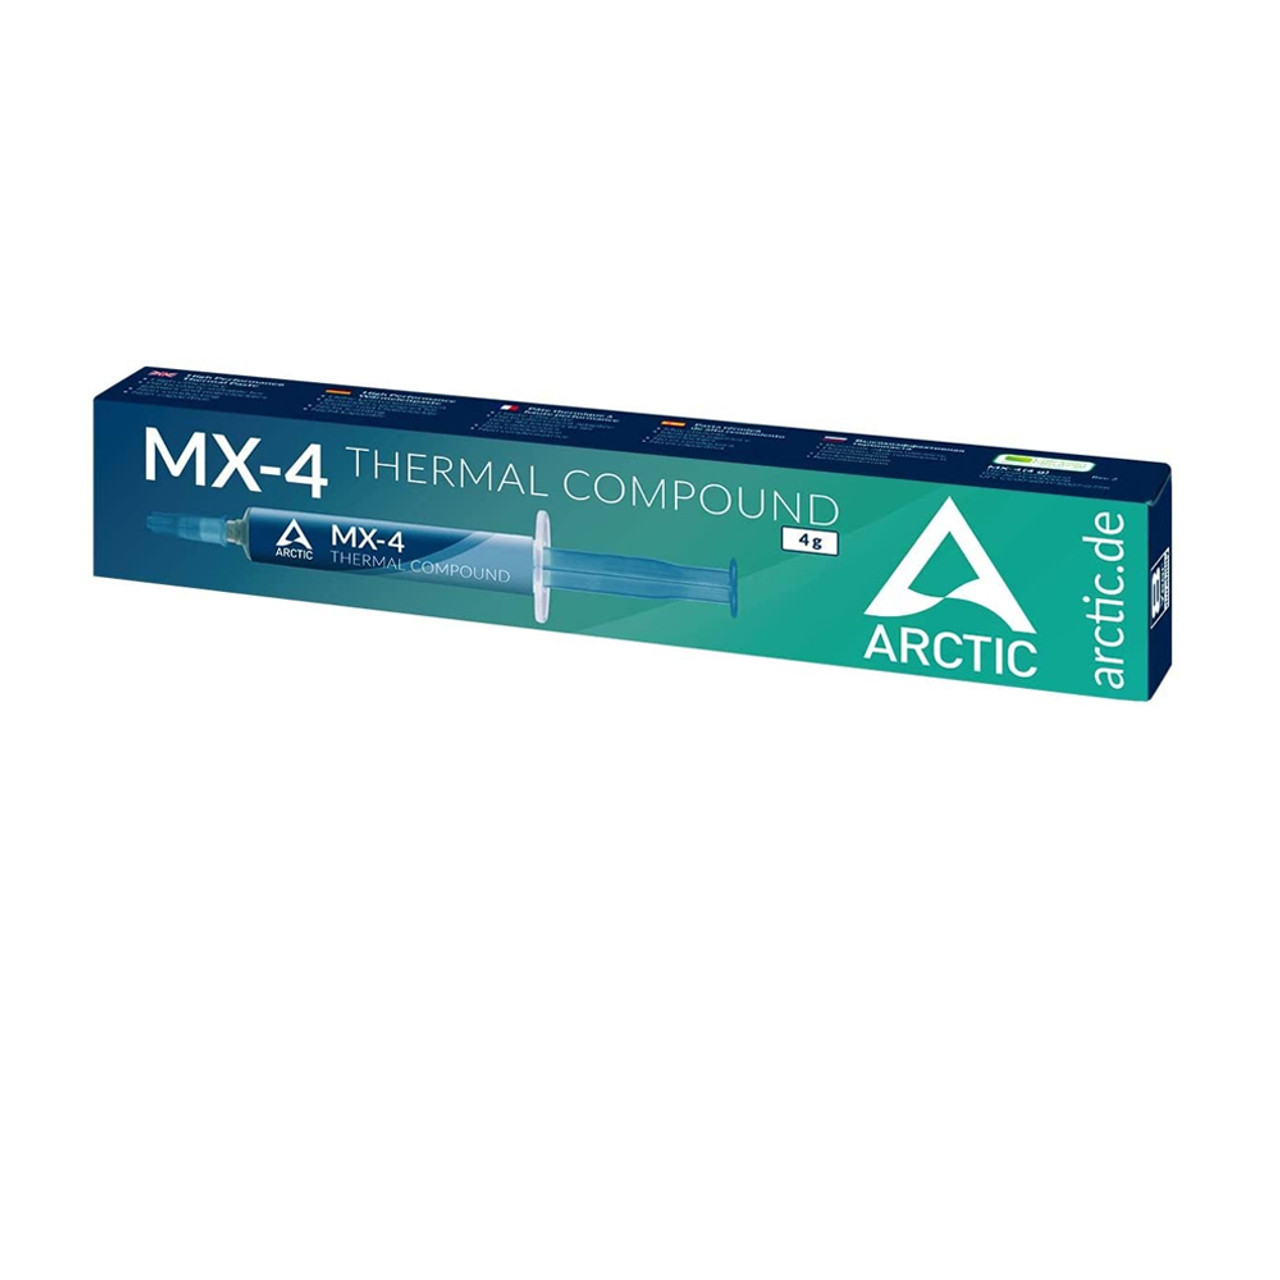 MX-6, ULTIMATE Performance Thermal Paste, ACTCP00079A